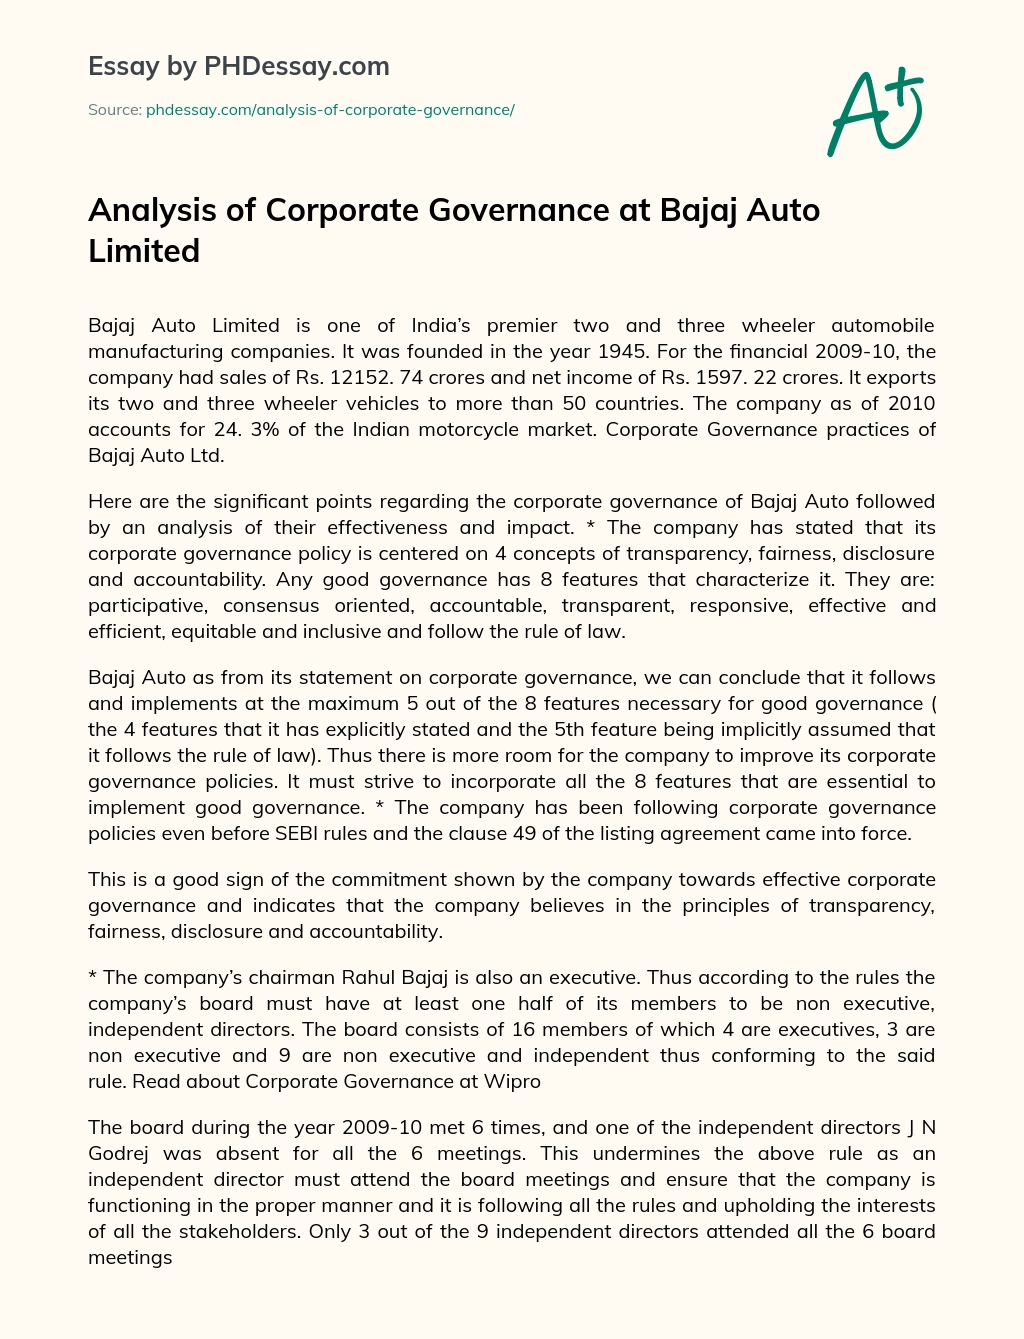 Analysis of Corporate Governance at Bajaj Auto Limited essay